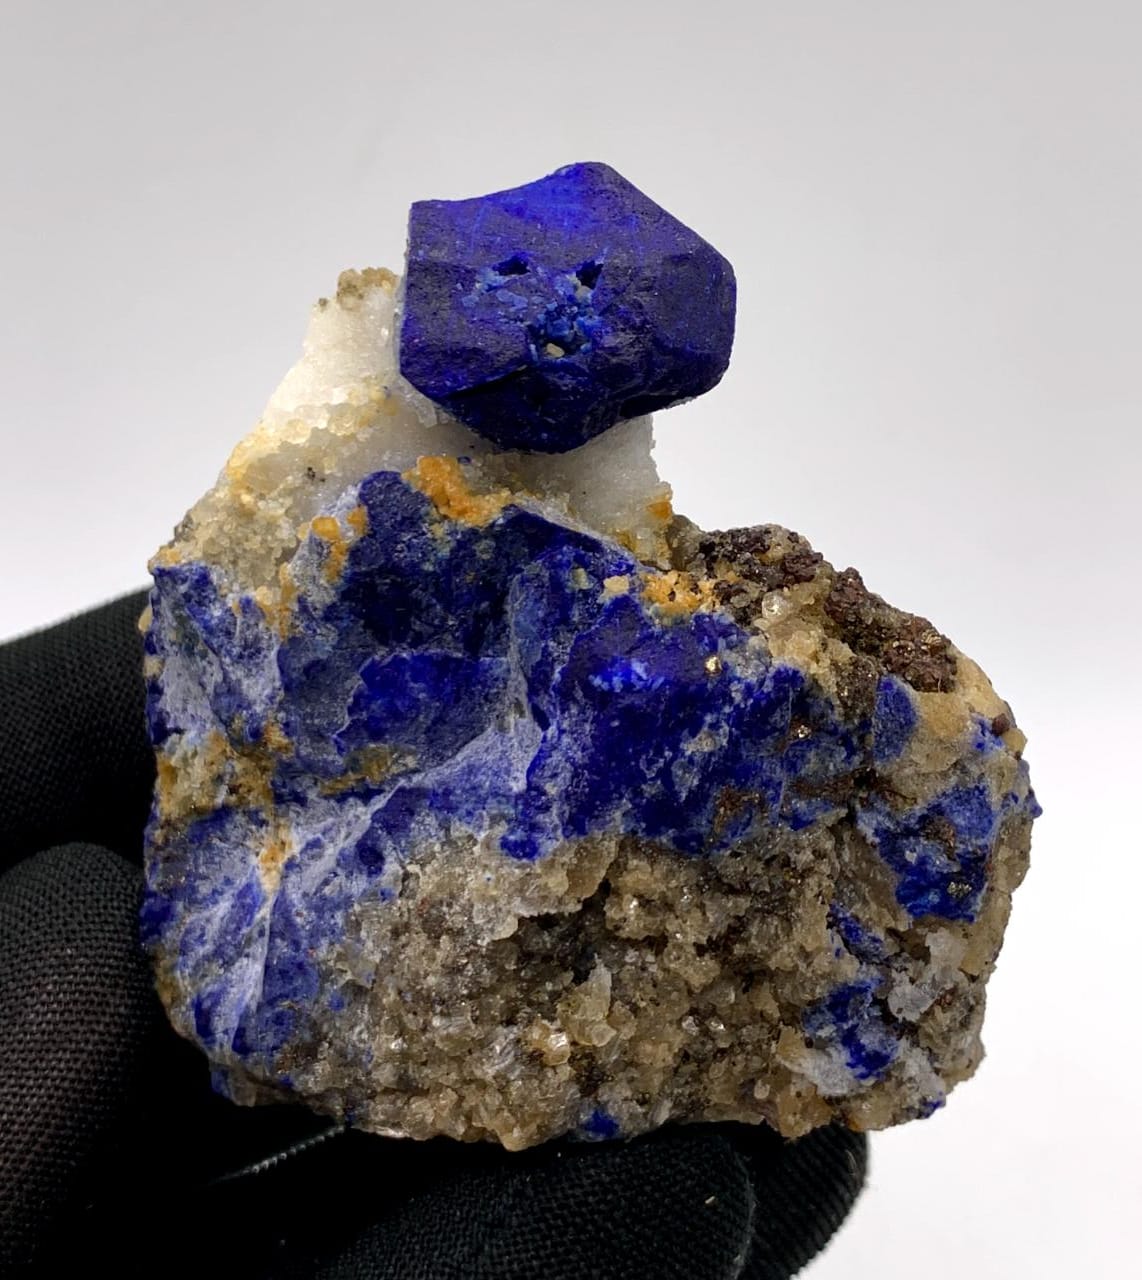 Lovely Lazurite Crystal Nicely Perched On Calcite With Pyrite